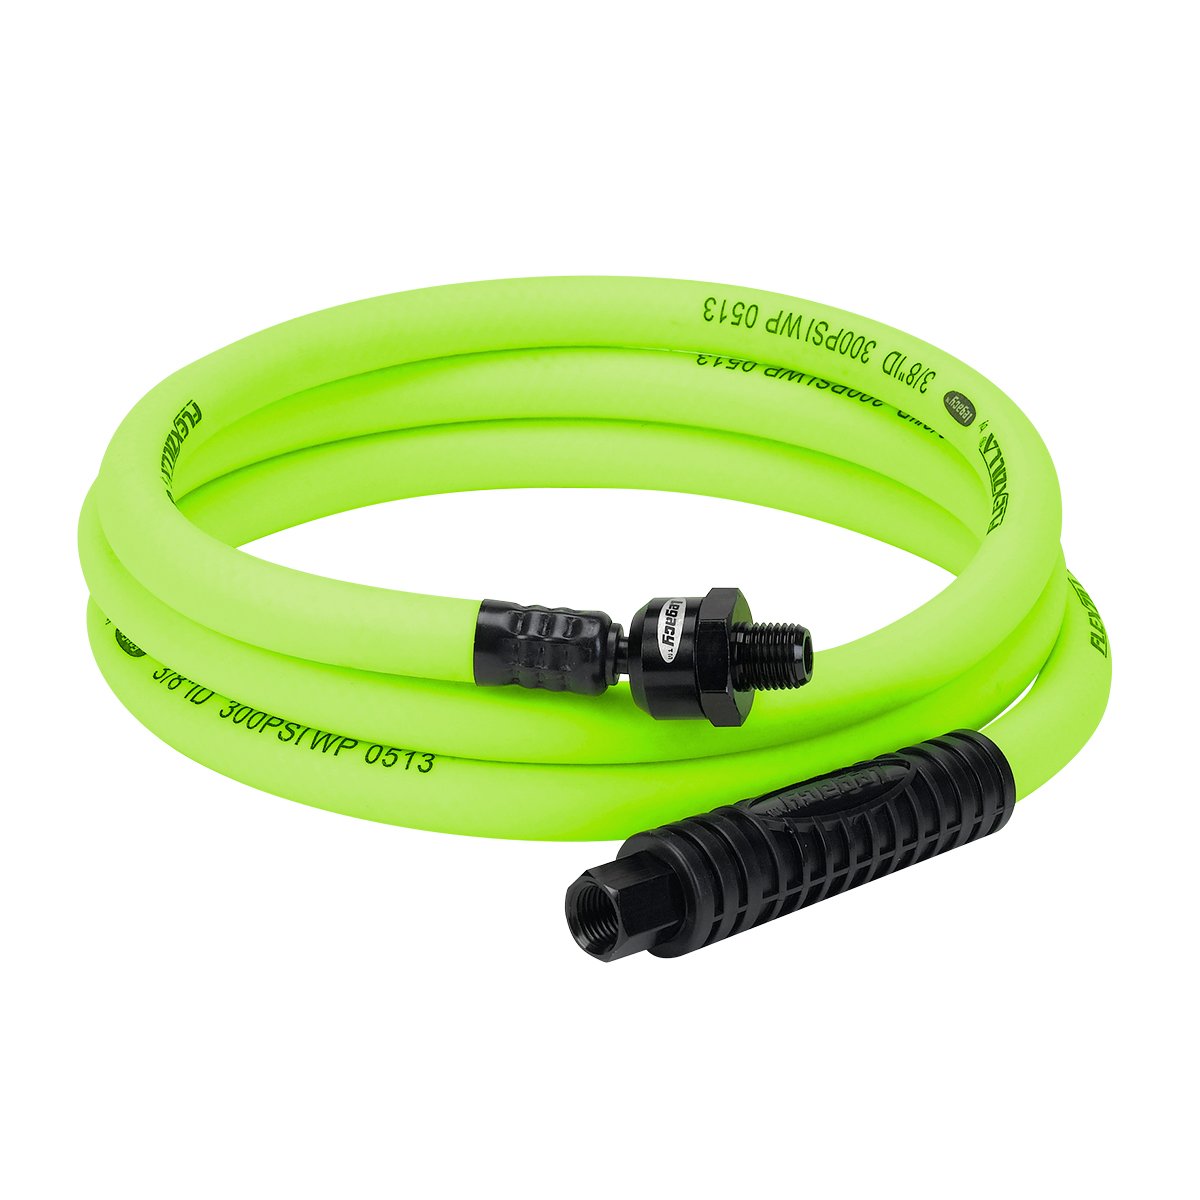 Flexzilla 3/8 x 6' FT Air Hose Whip With Ball Swivel 300PSI Working P –  Pricedrightsales